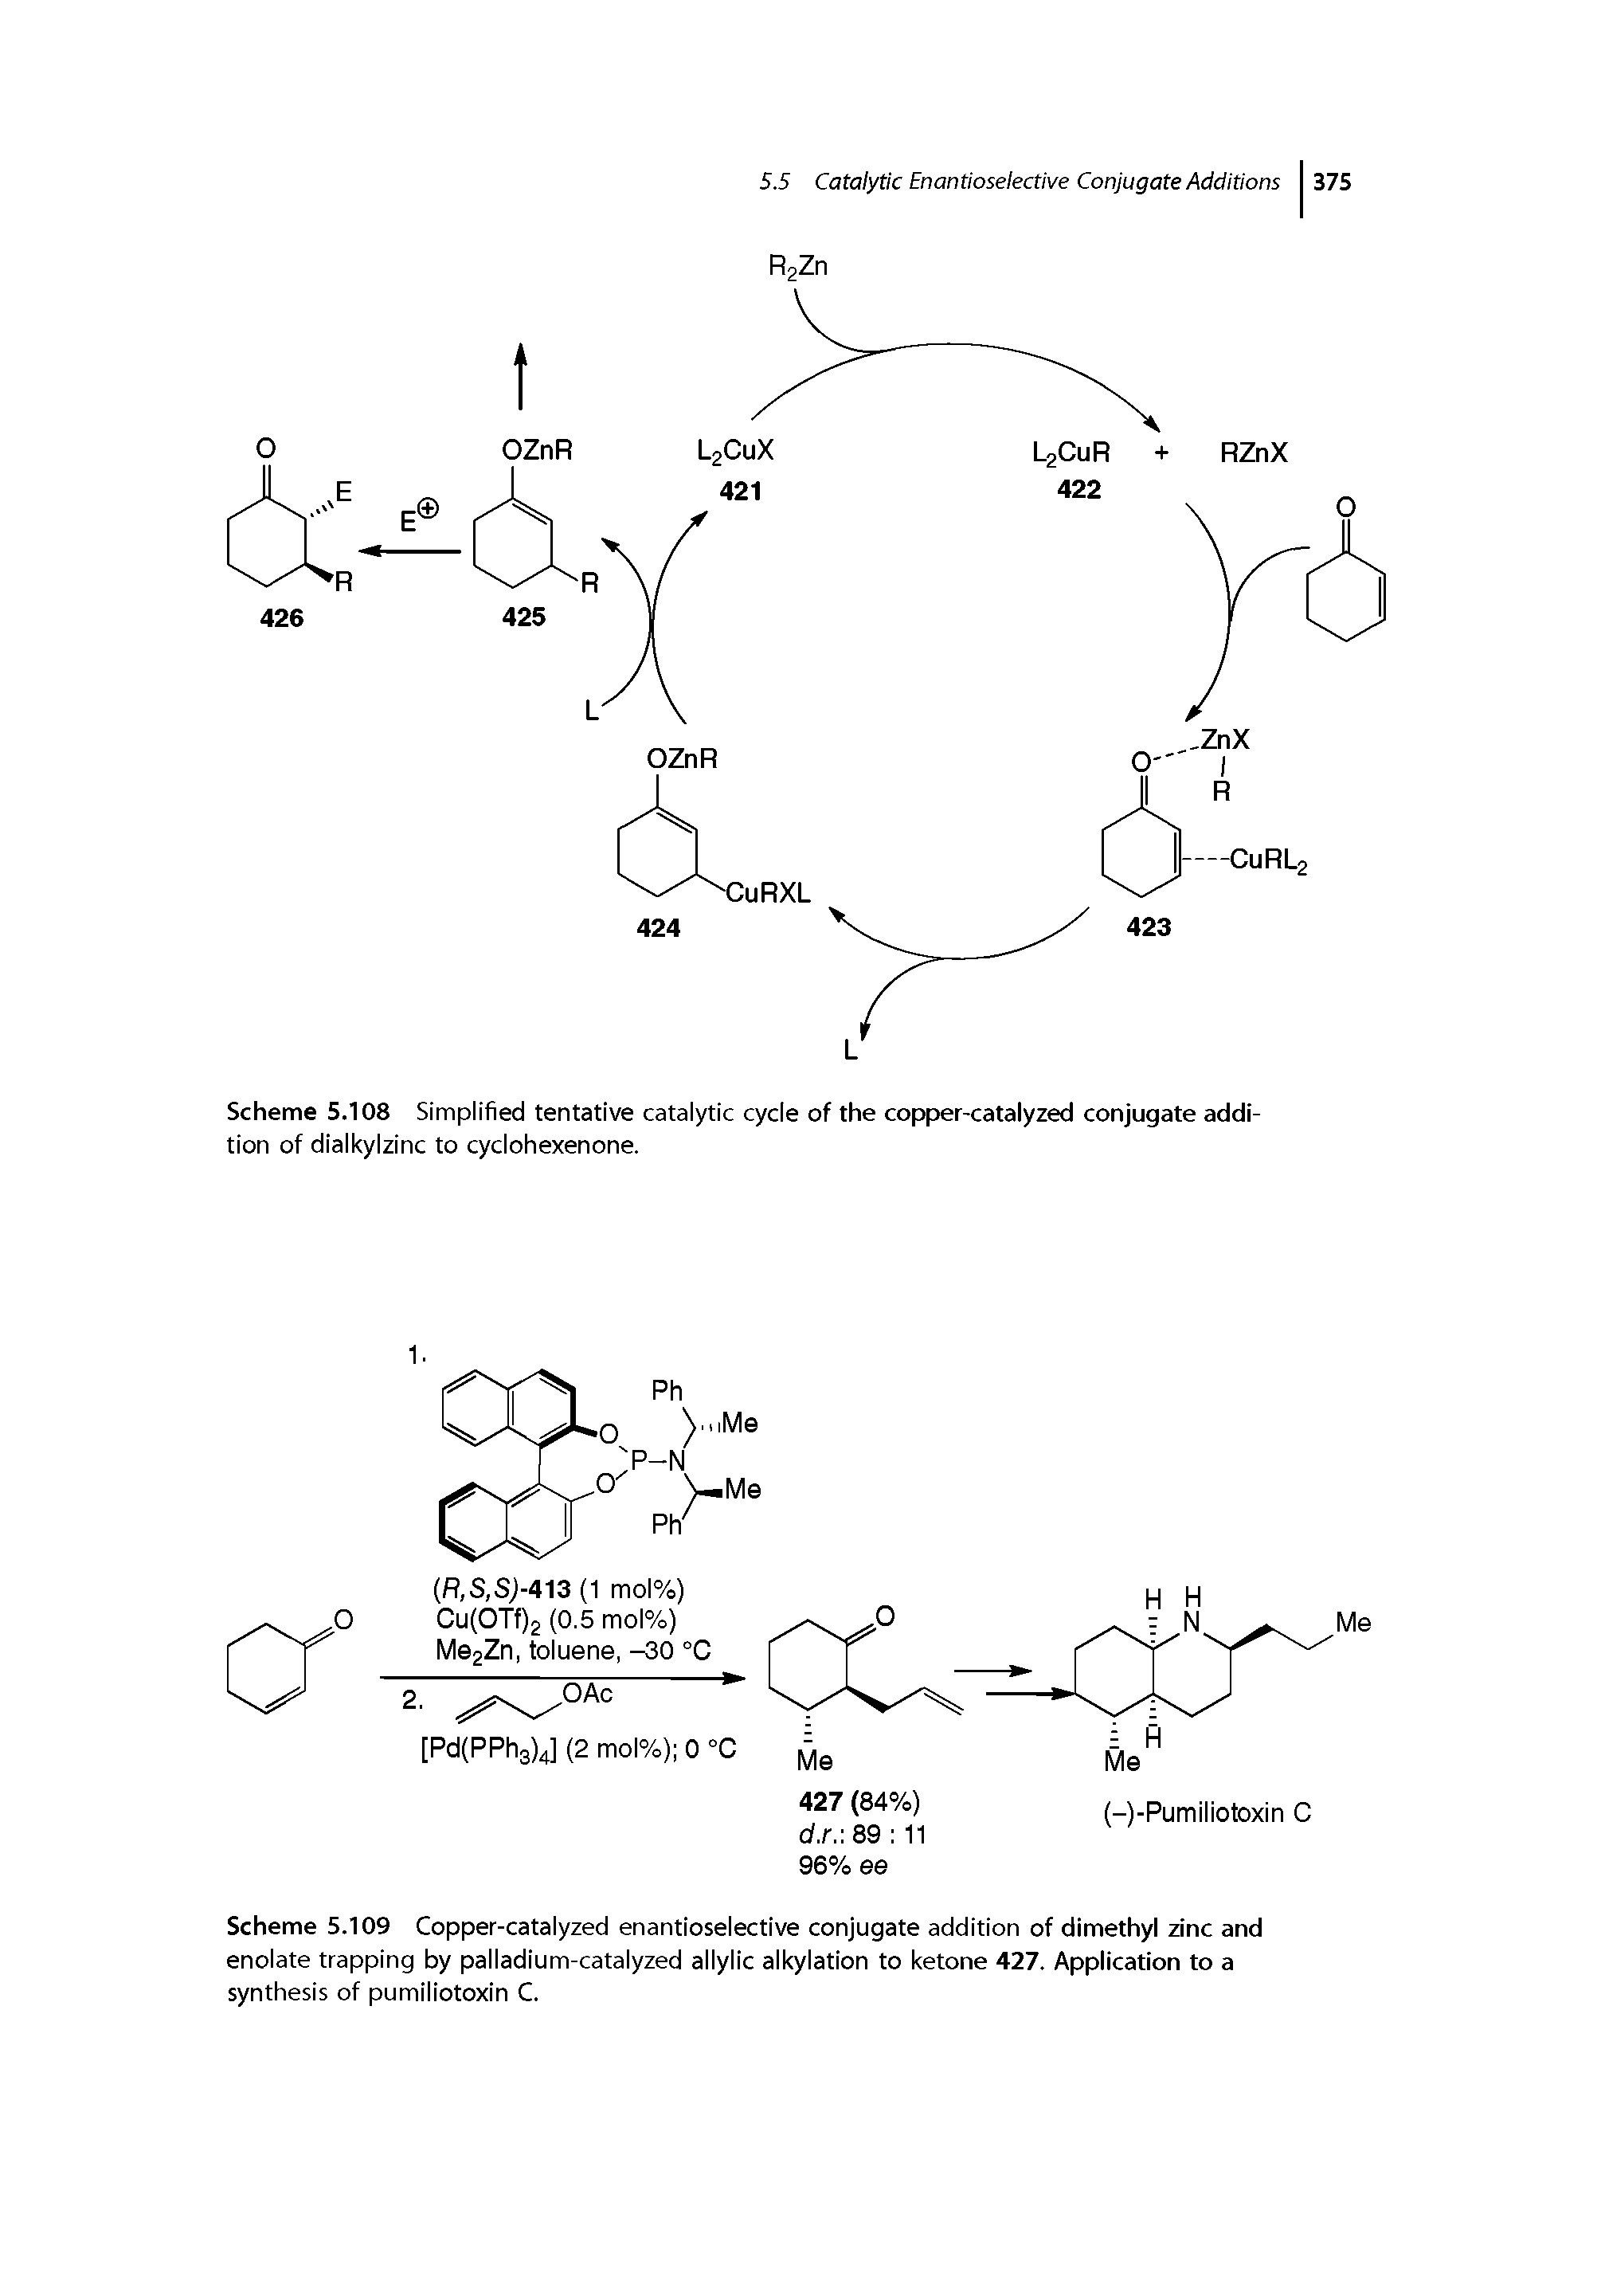 Scheme 5.109 Copper-catalyzed enantioselective conjugate addition of dimethyl zinc and enolate trapping by palladium-catalyzed allylic alkylation to ketone 427. Application to a synthesis of pumiliotoxin C.